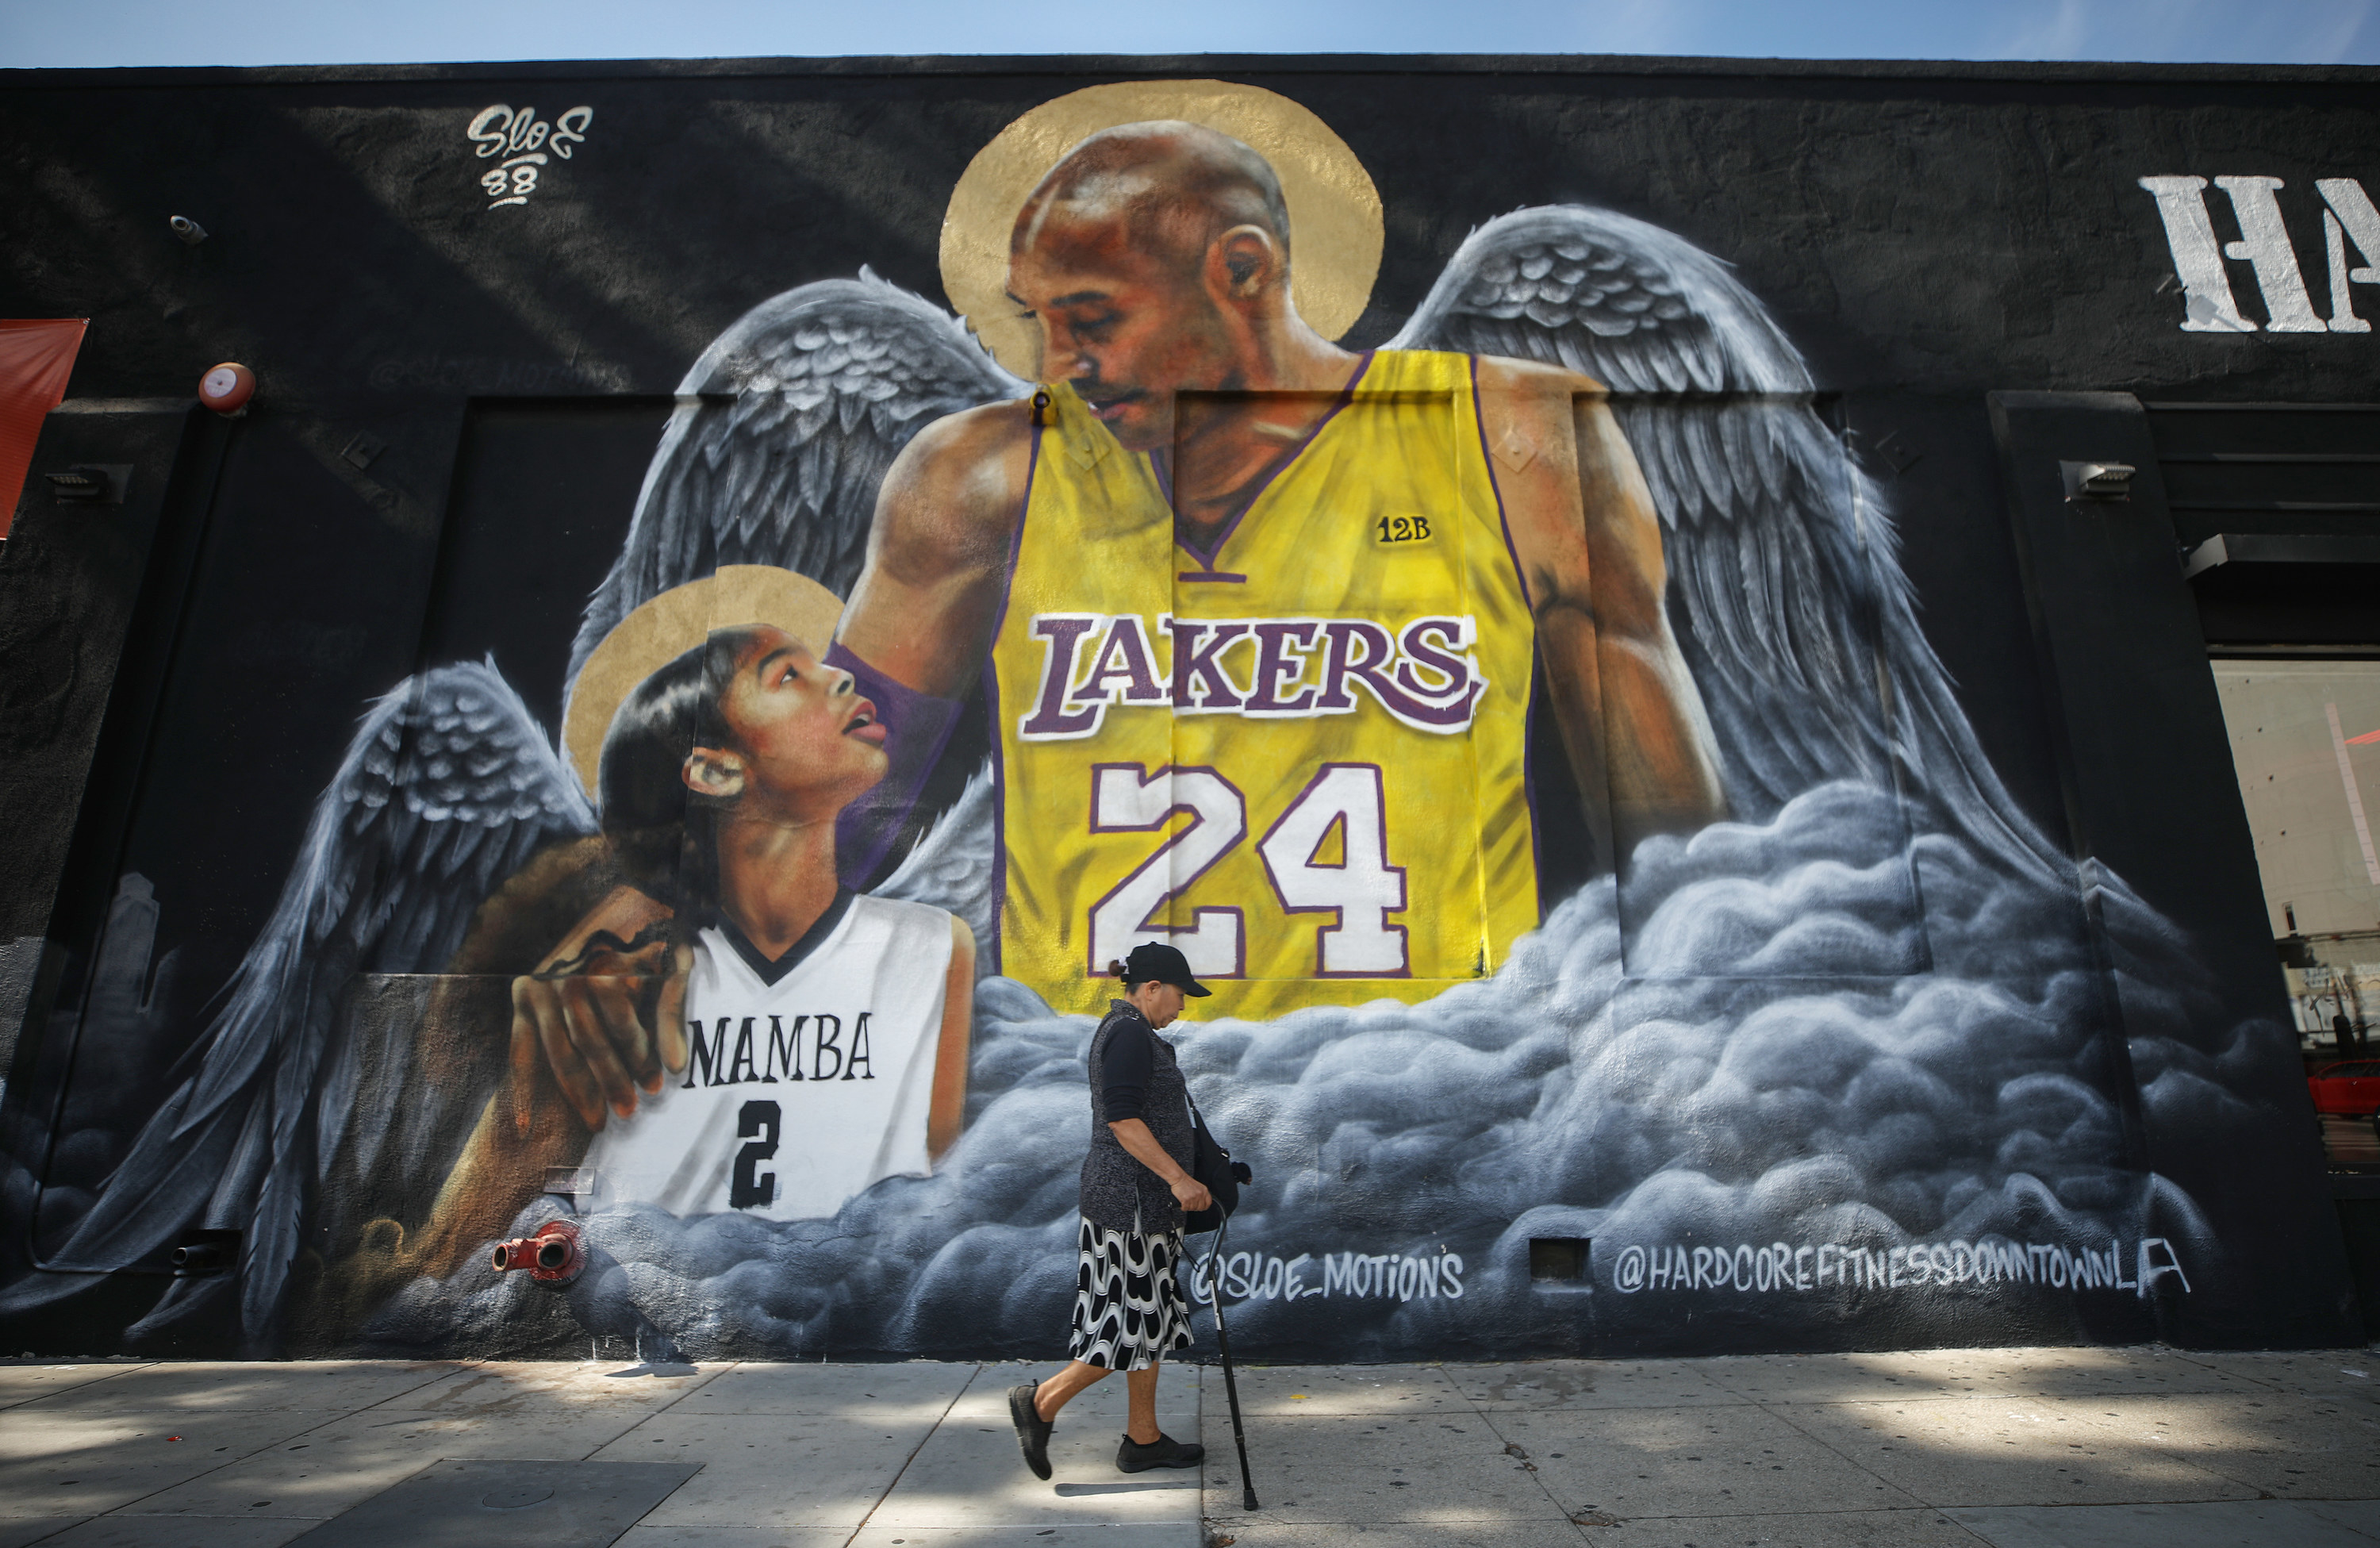 A mural depicting Bryant and his daughter Gianna, painted by @sloe_motions, is displayed on a building on February 13, 2020, in Los Angeles